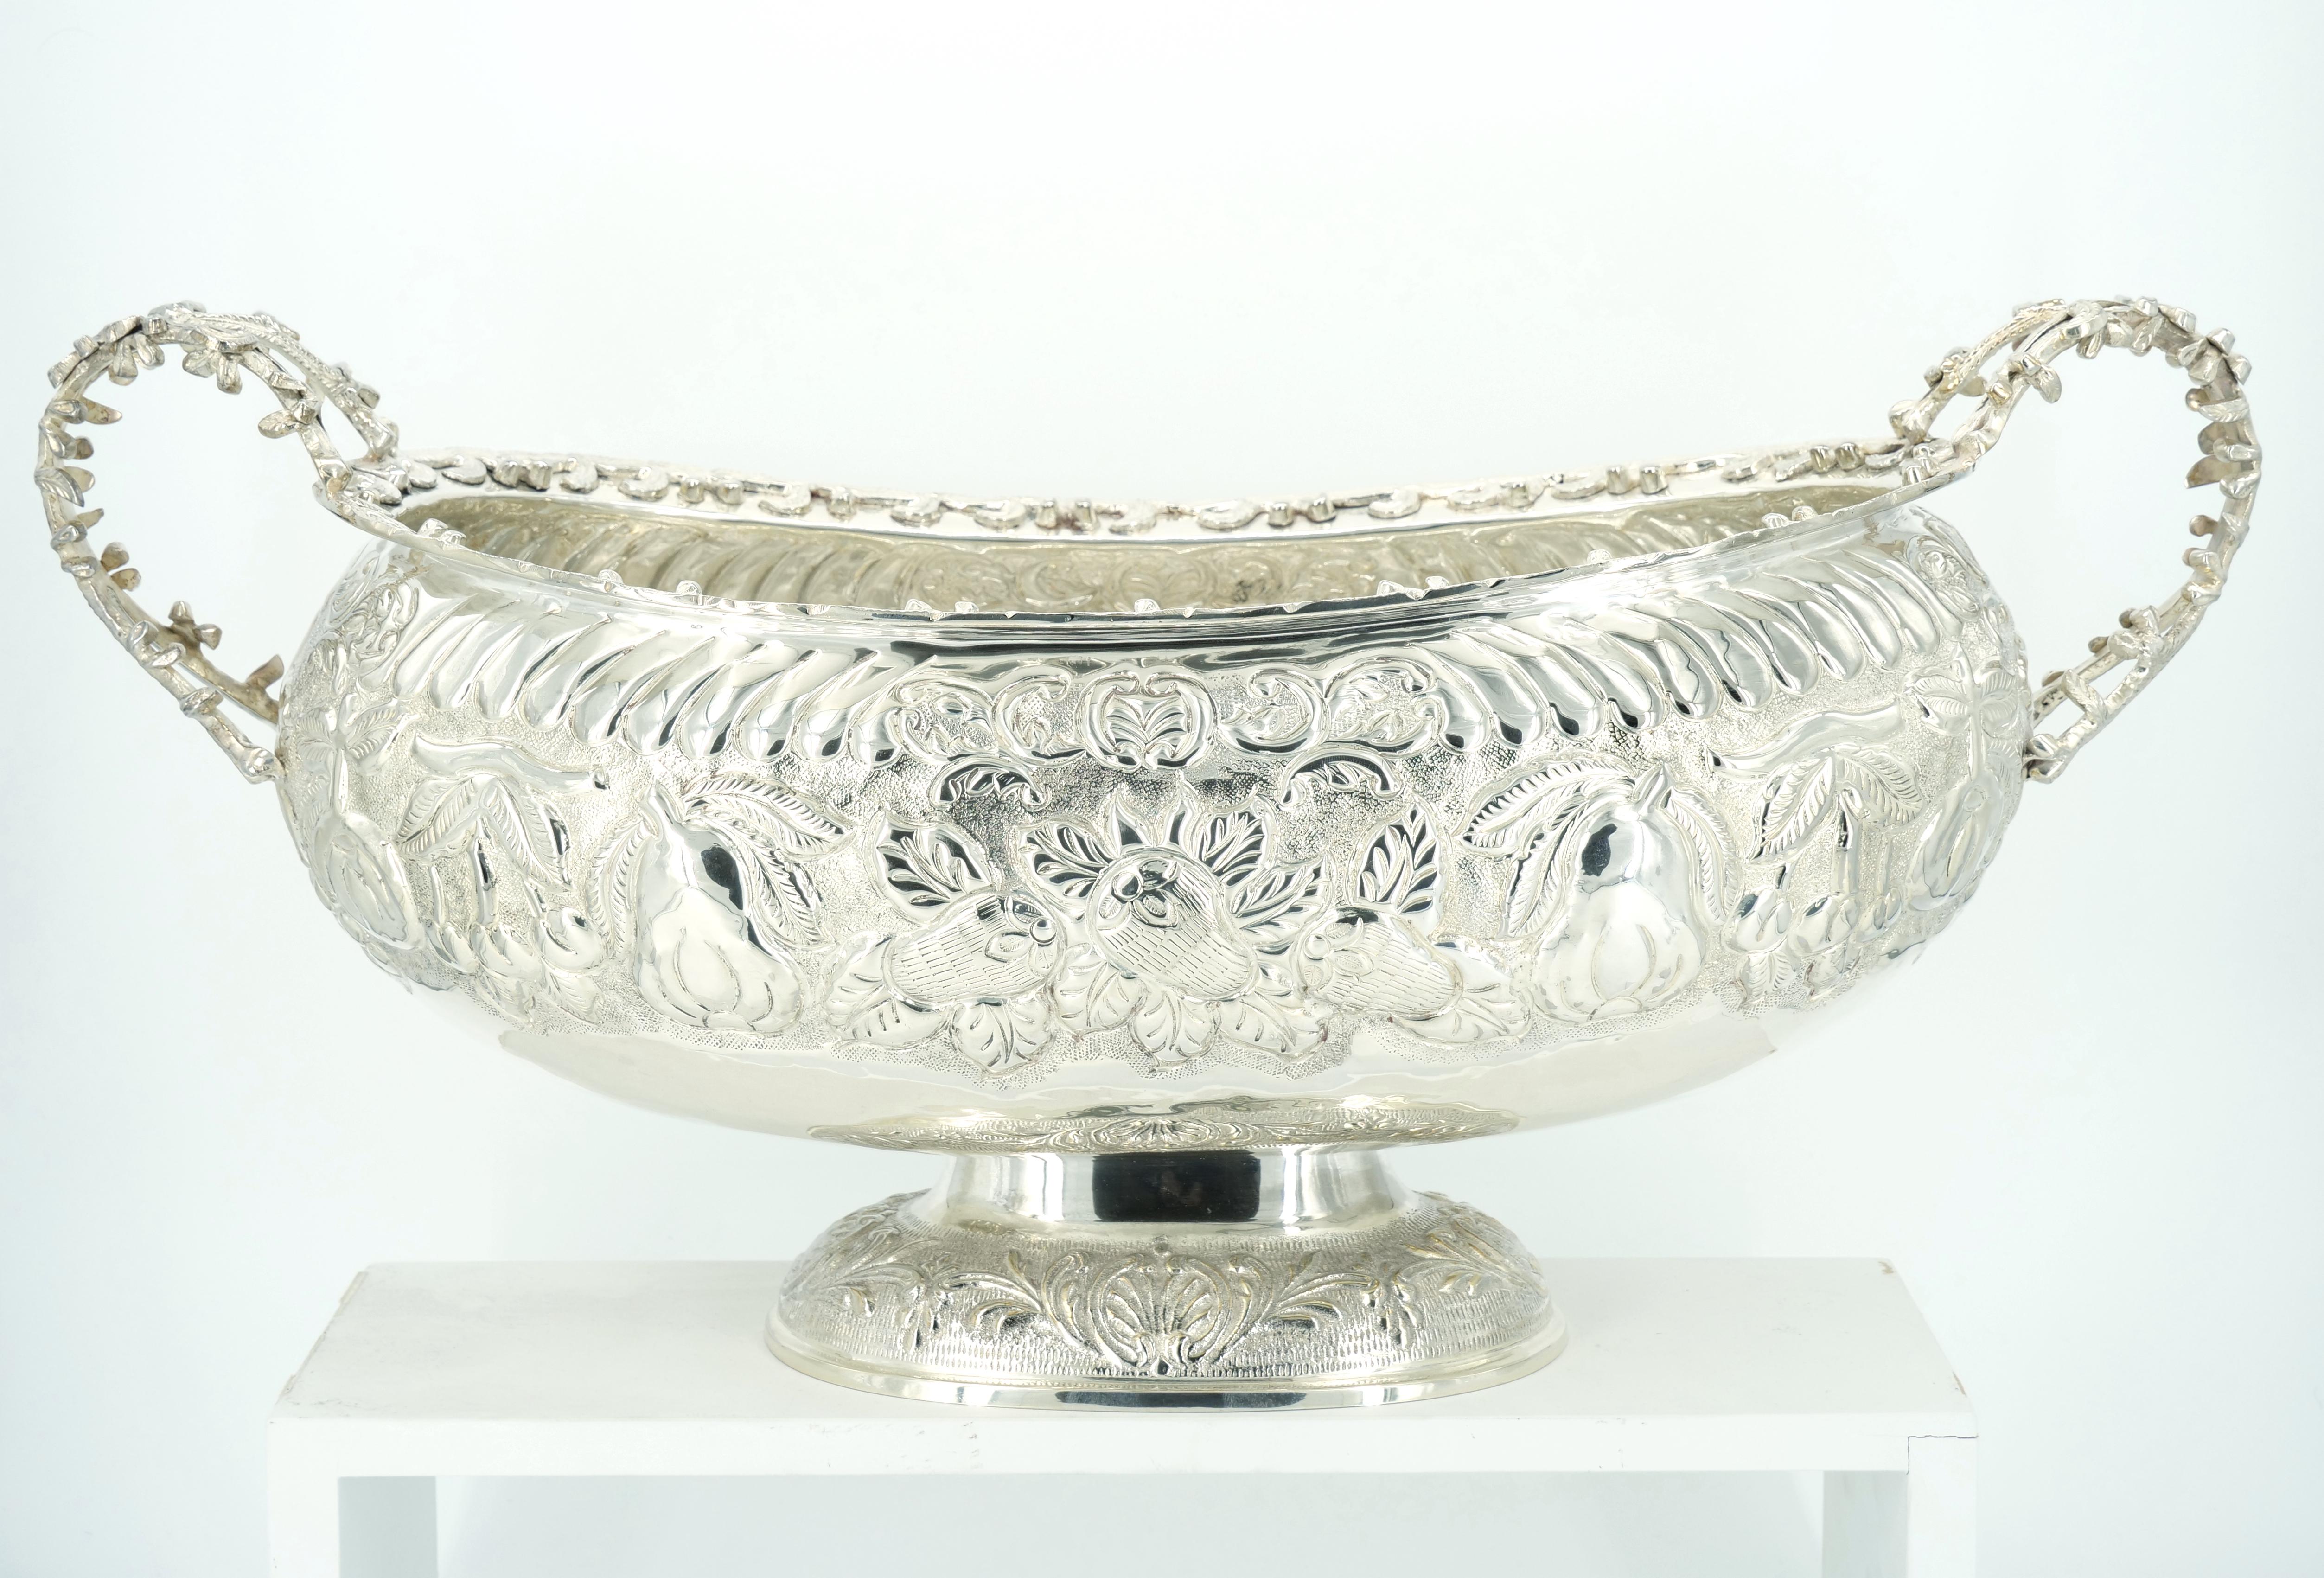 Large & Very Ornate Hand Crafted Silver Plate Champagne Cooler / Centerpiece For Sale 1